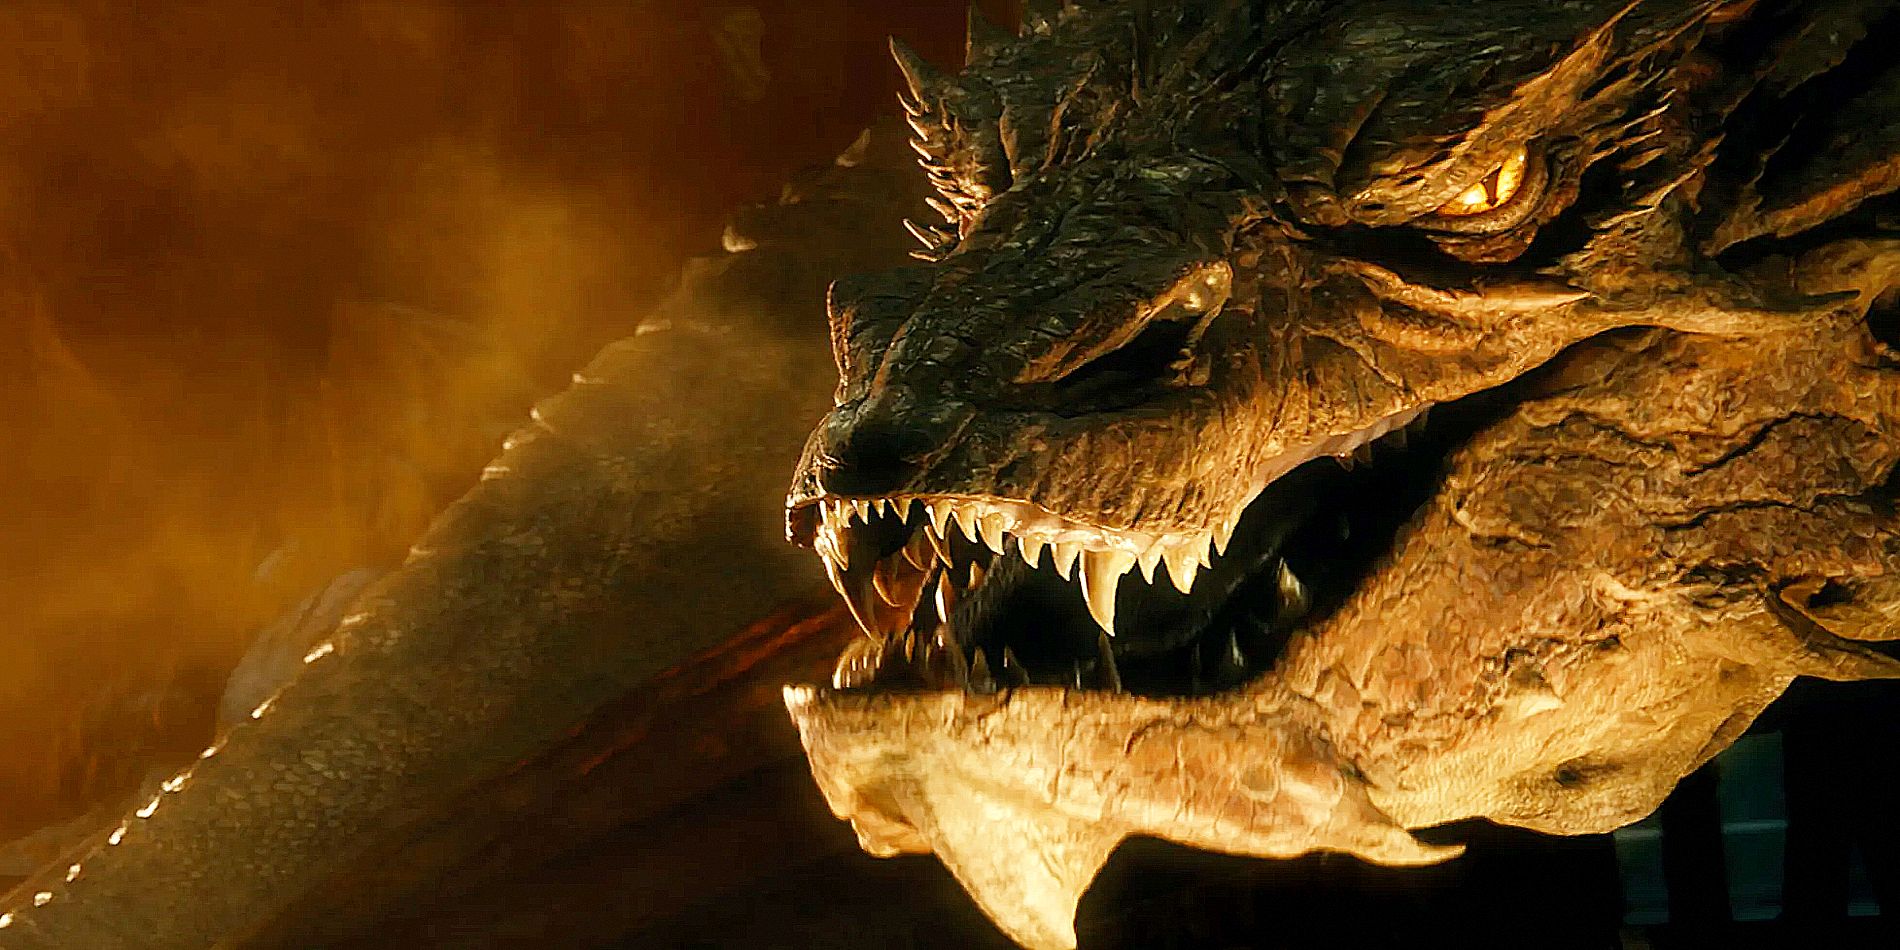 How The Hobbit Got Smaug Wrong (And Why Del Toro Would Have Got Him Right)